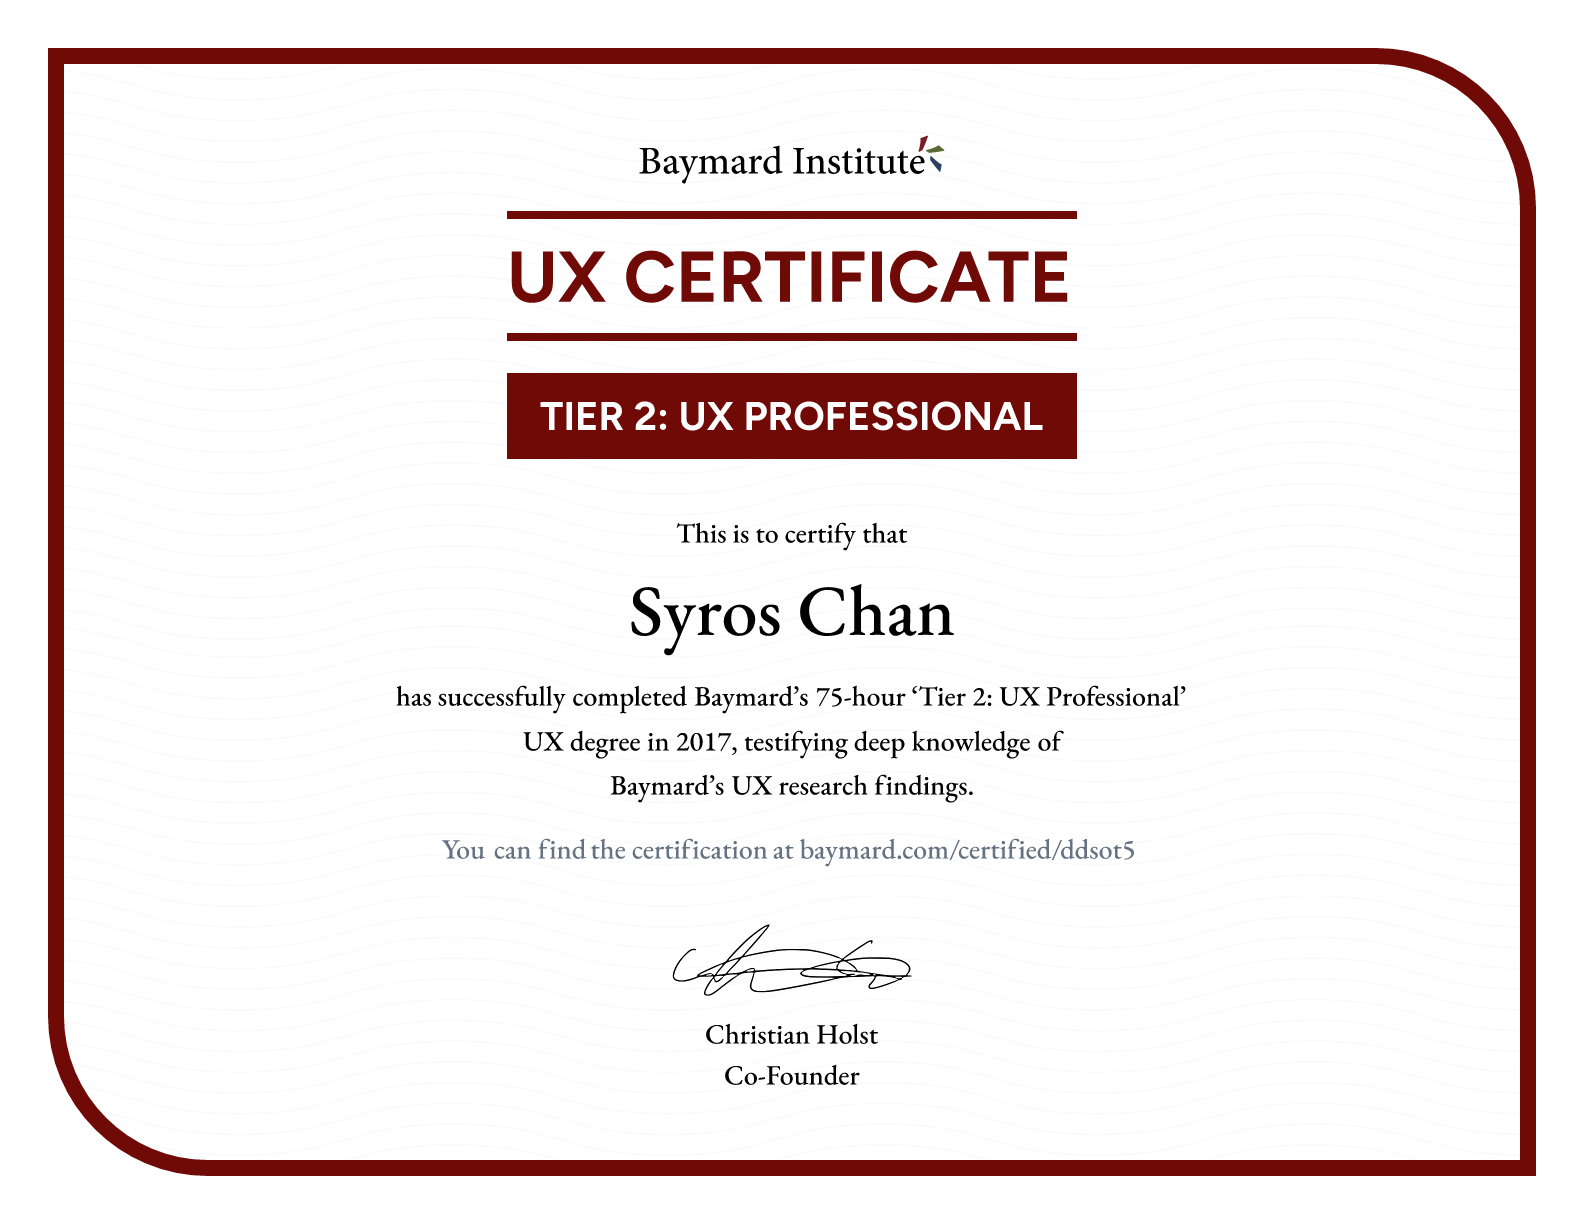 Syros Chan’s certificate